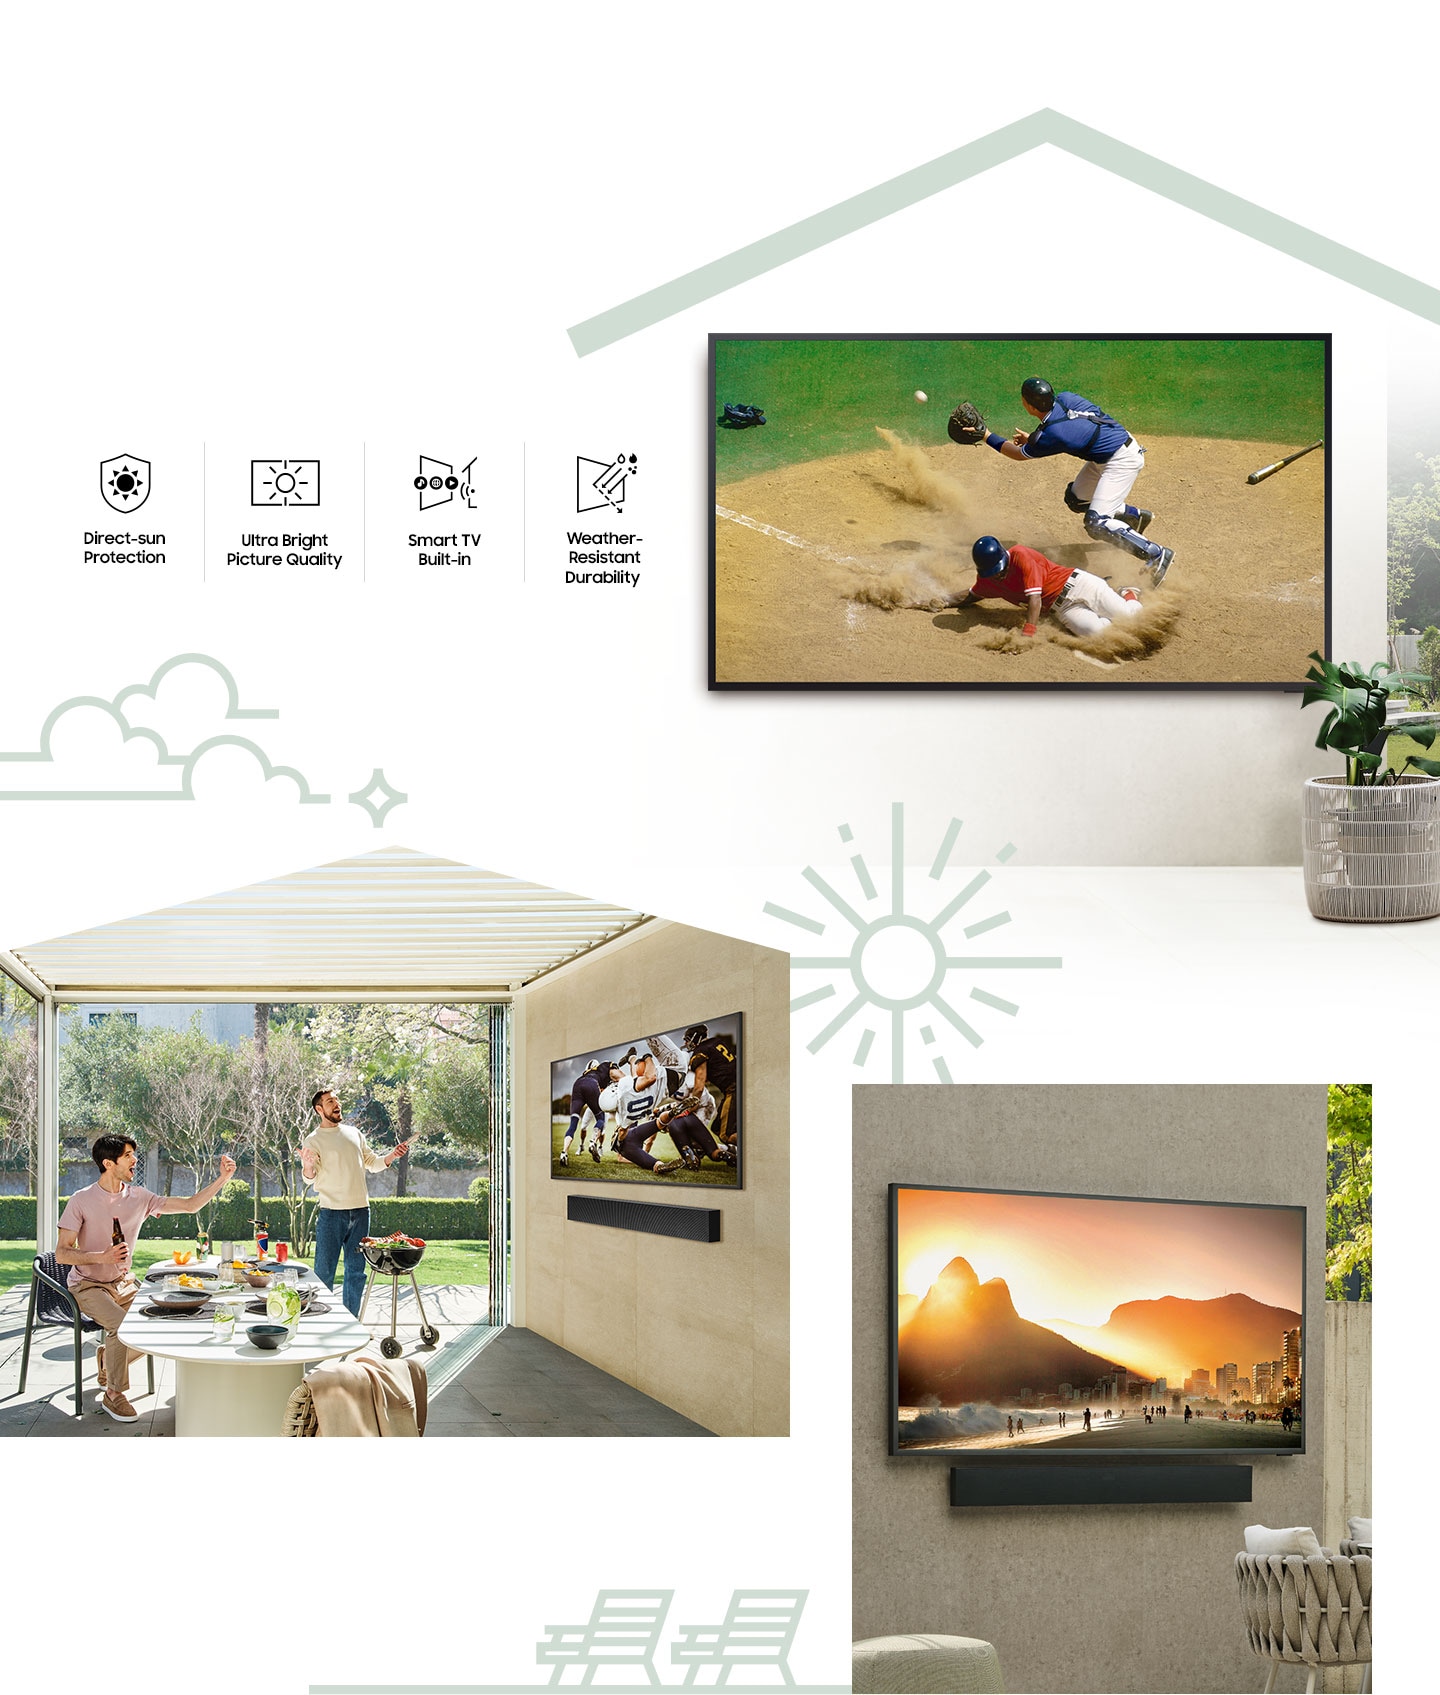 The Terrace is installed on a wall at an outdoor area. The Terrace's Top 4 feature are introduced as Direct-sun Protection, Ultra Bright Picture Quality, Smart TV built-in and Weather-Resistant Durability. The Terrace installed on the wall and 2 people are watching a sports game outdoors. The Terrace is installed on a wall outdoors.